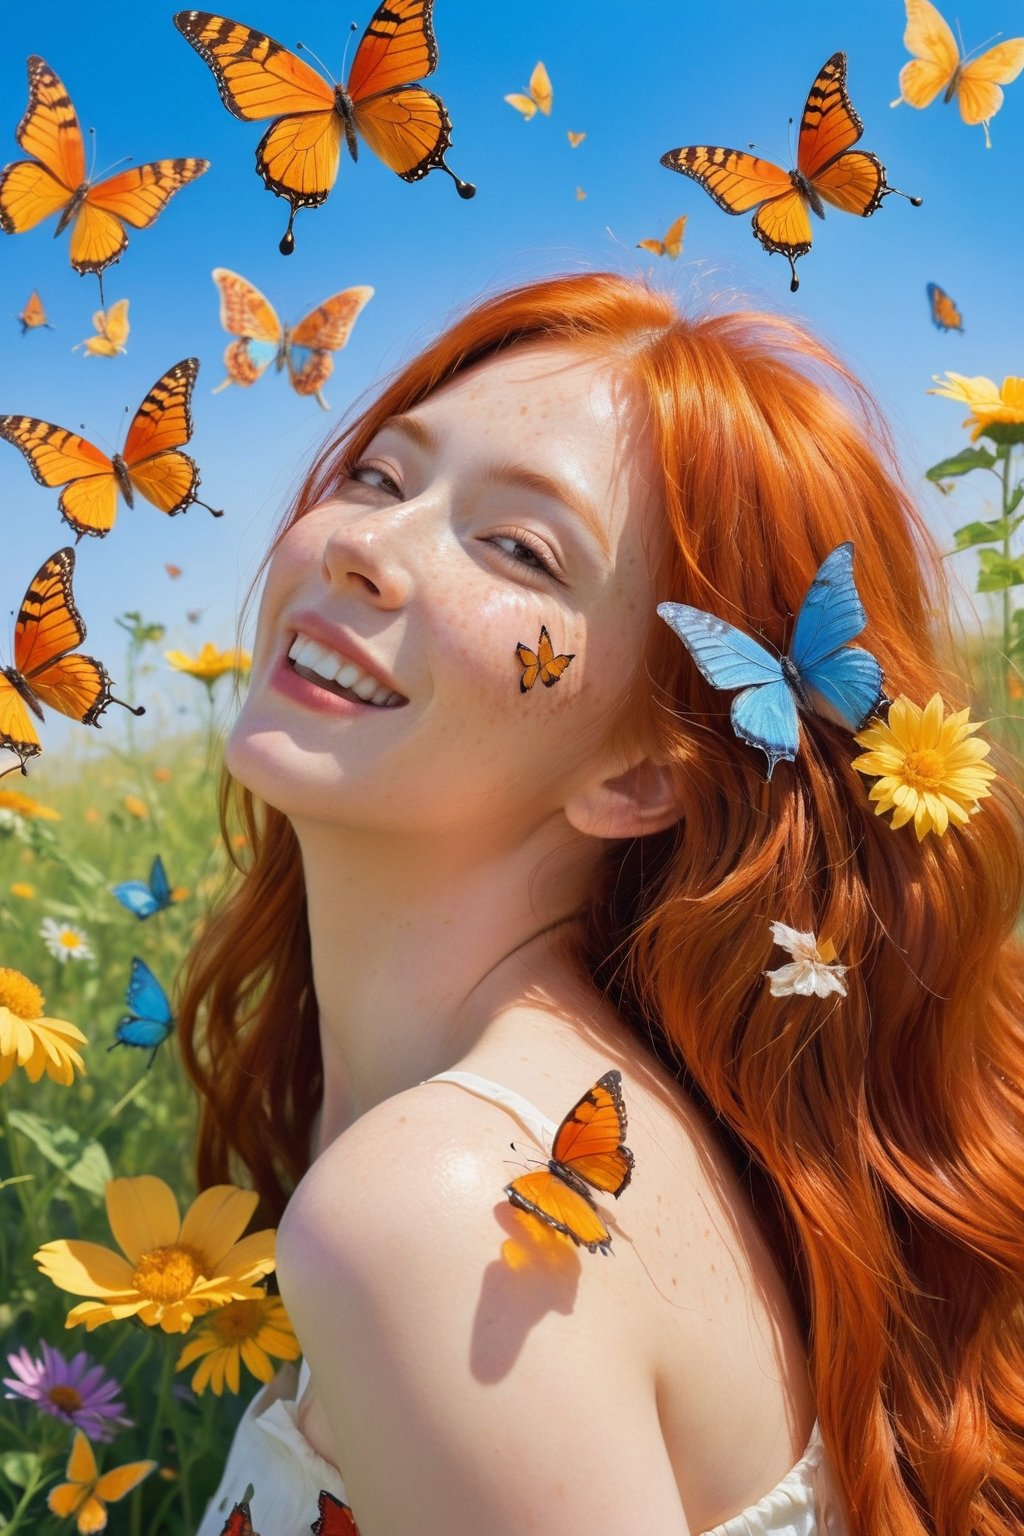 butterfly\(hubggirl)\,Imagine a joyful portrait of a woman with freckles and fiery red hair. Let her laugh as she interacts playfully with butterflies fluttering around her in a sun-dappled meadow. Depict the joy and wonder on her face, and the vibrant colors of the flowers and butterflies